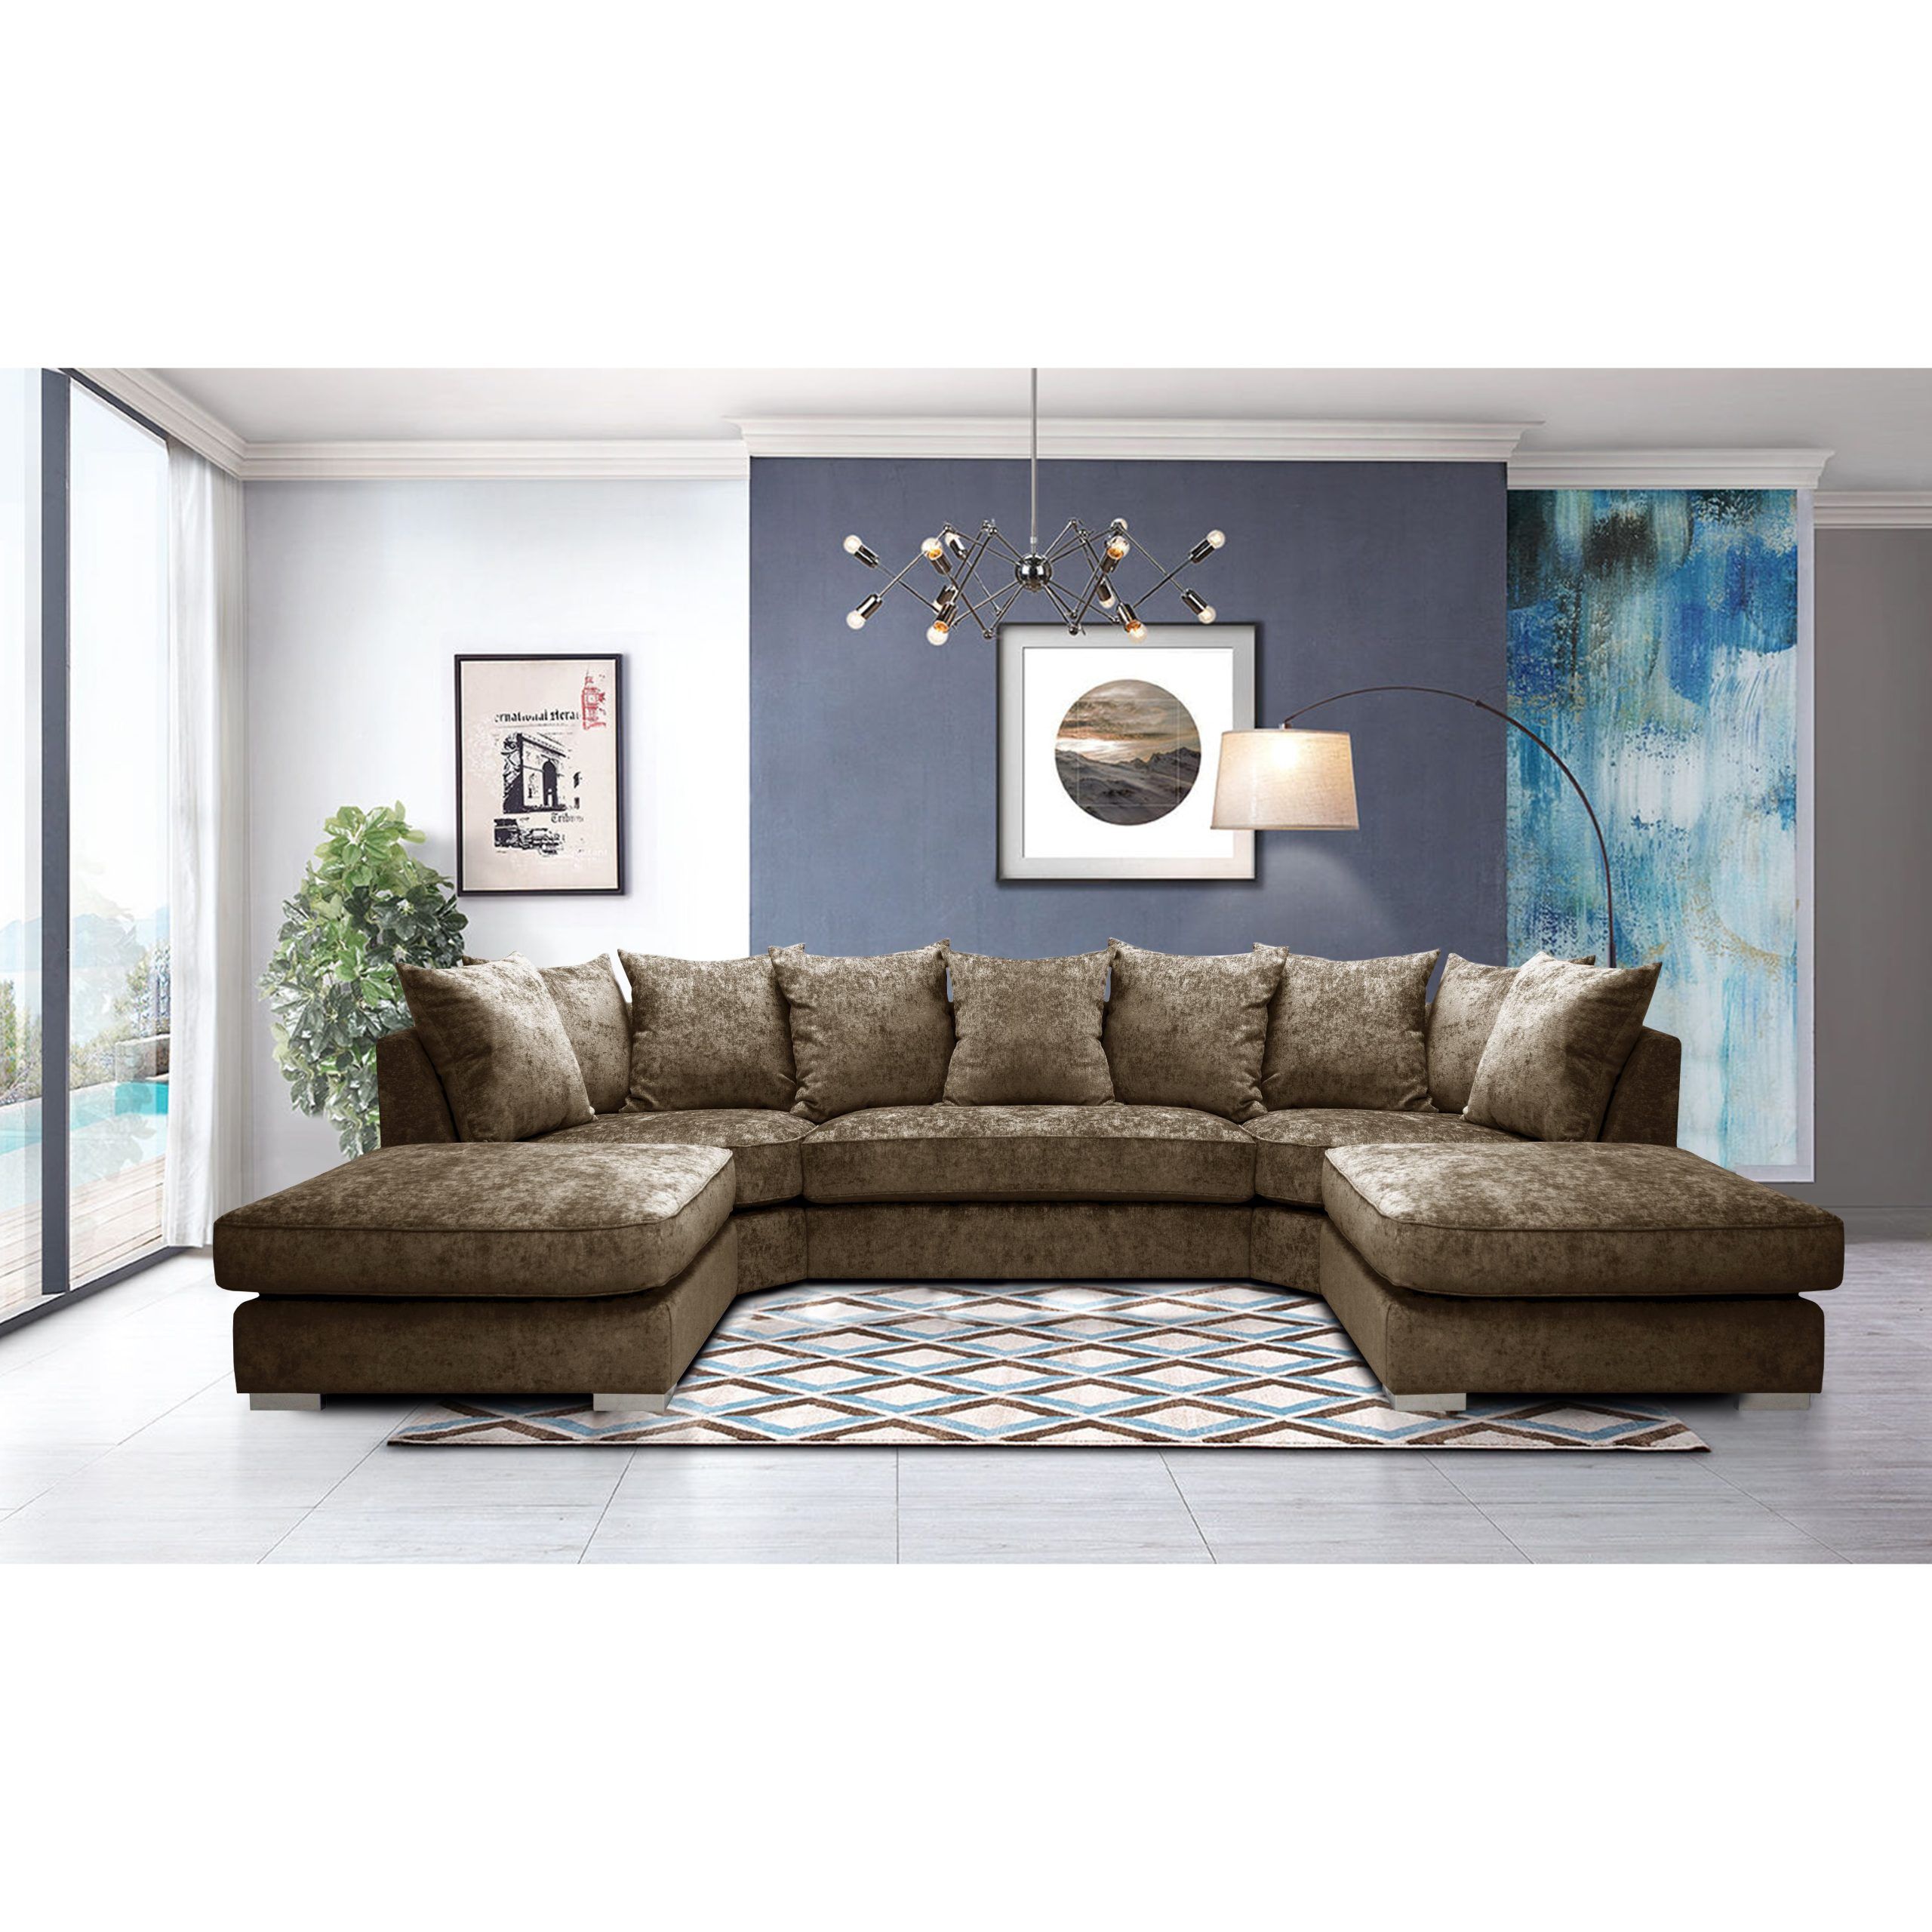 Limitless Home U Shaped Sofa With Removable Footstools | Chenille For U Shaped Couches In Beige (View 16 of 20)